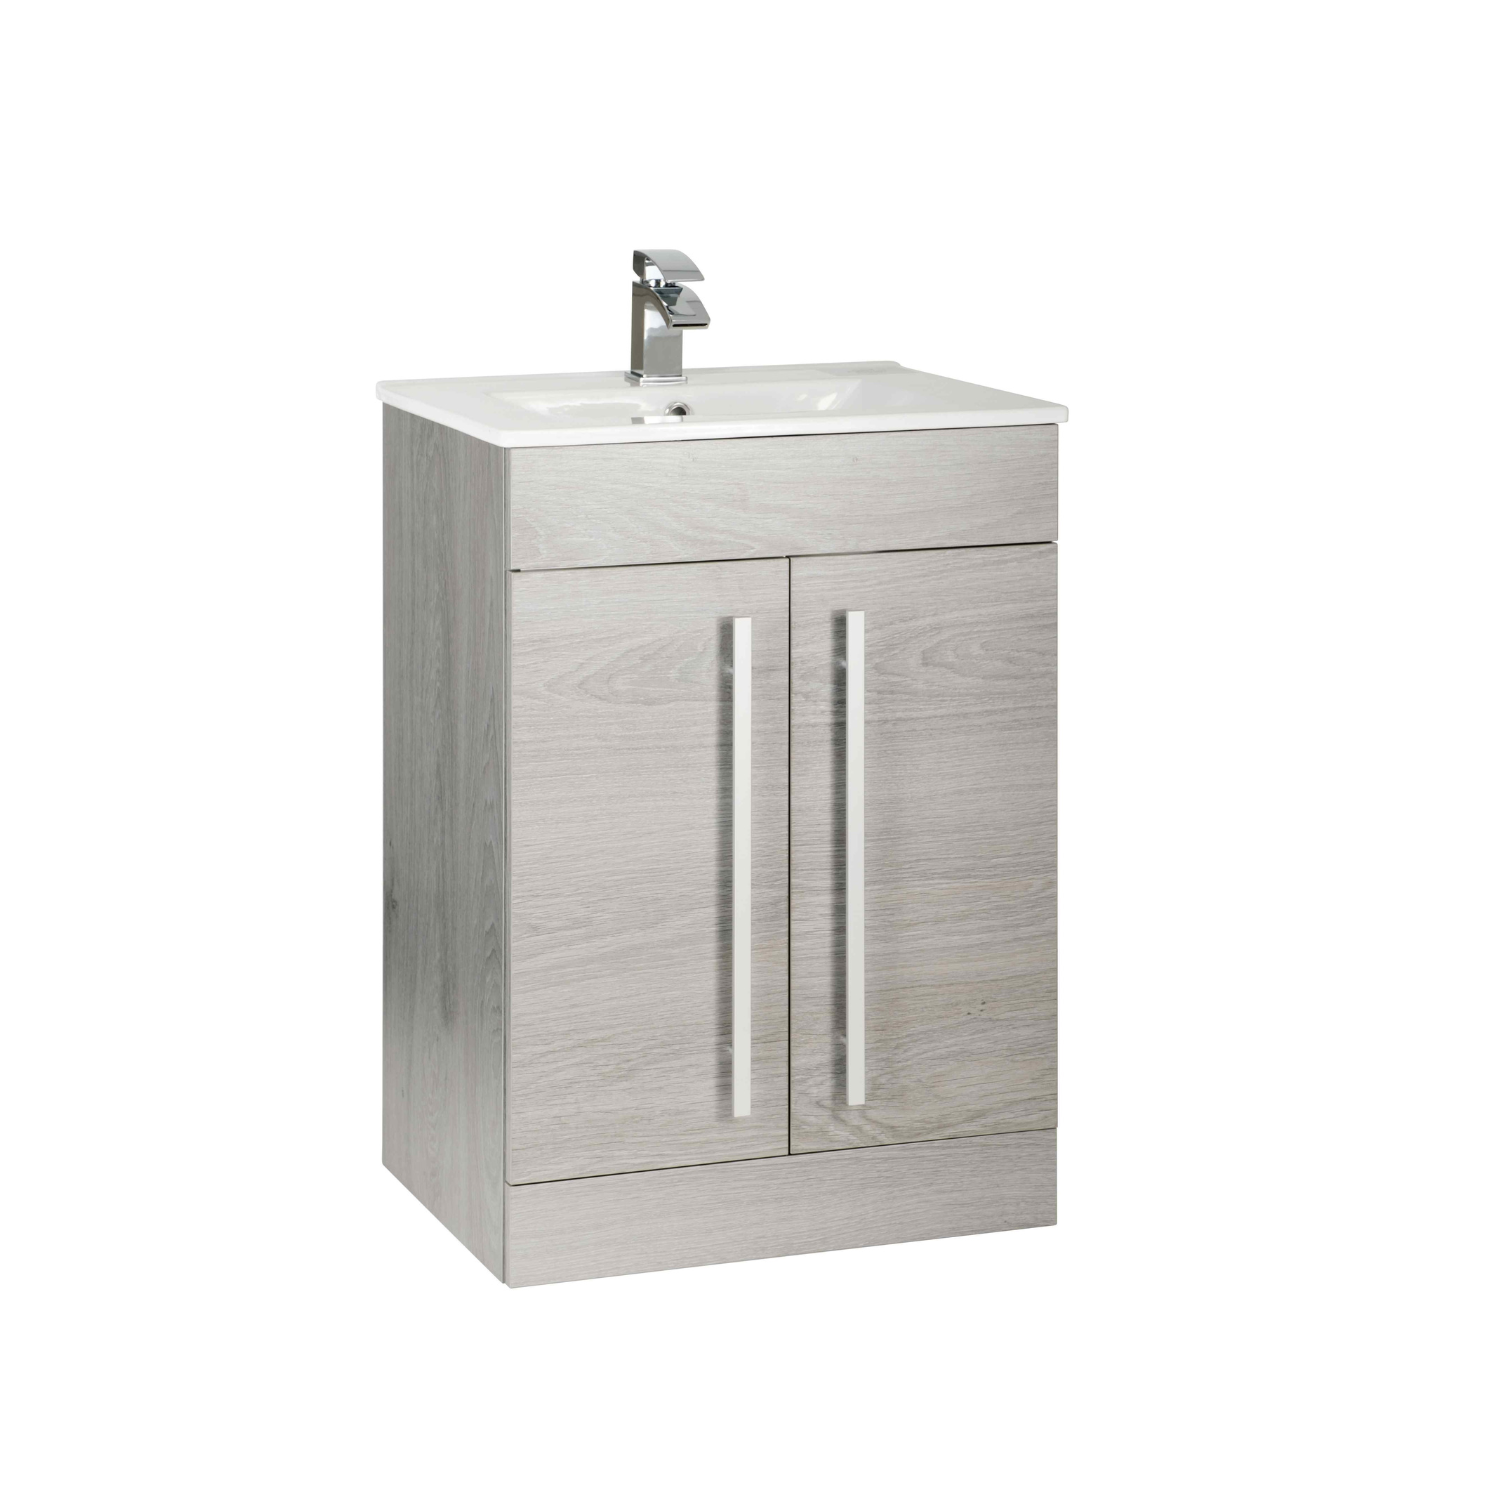 Purity Silver Oak Toilet & Basin Suite with Vanity Unit - Stylish Space-Saving Solution